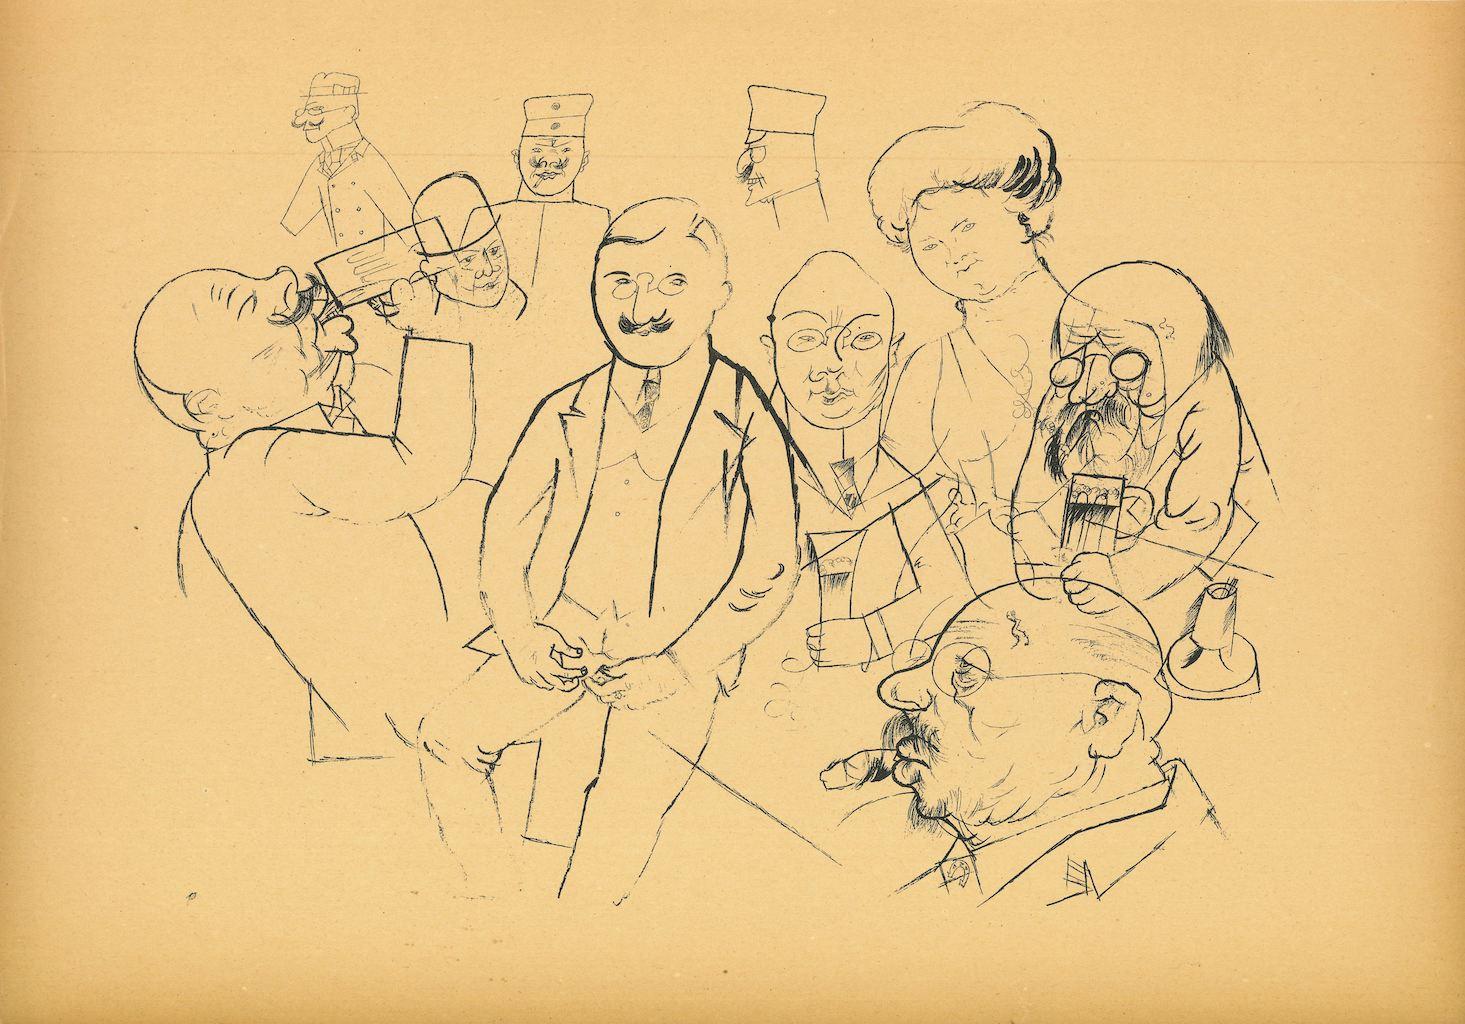 Studies - Original Offset and Lithograph by George Grosz - 1923